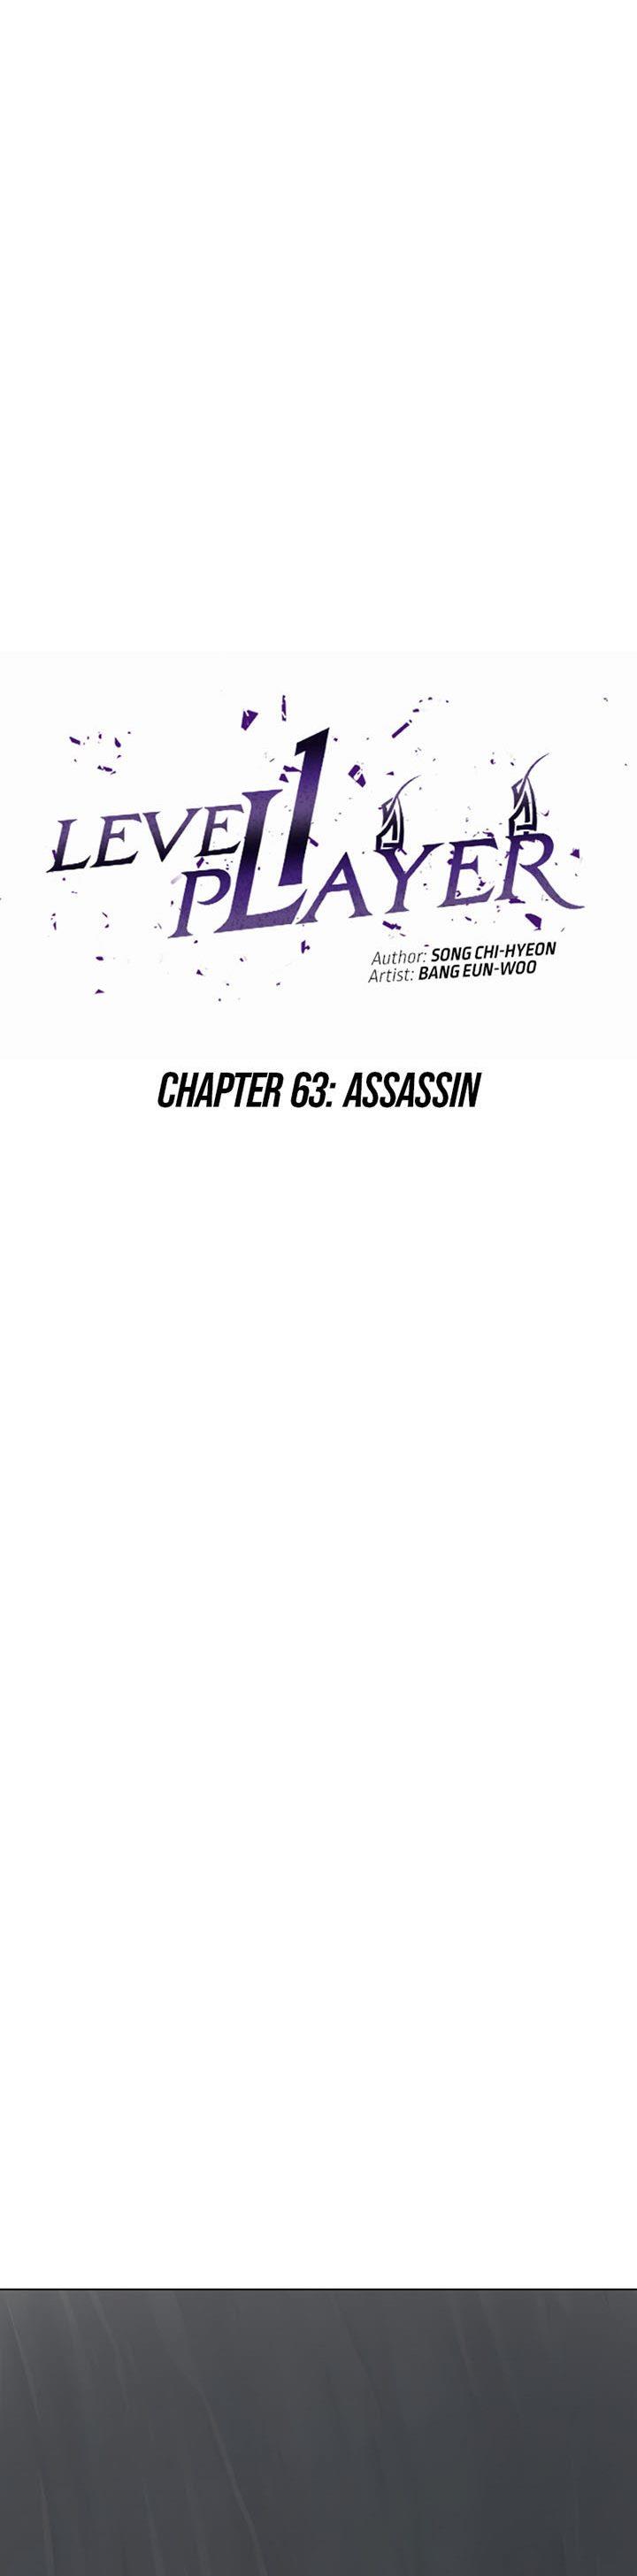 Level 1 Player Chapter 63